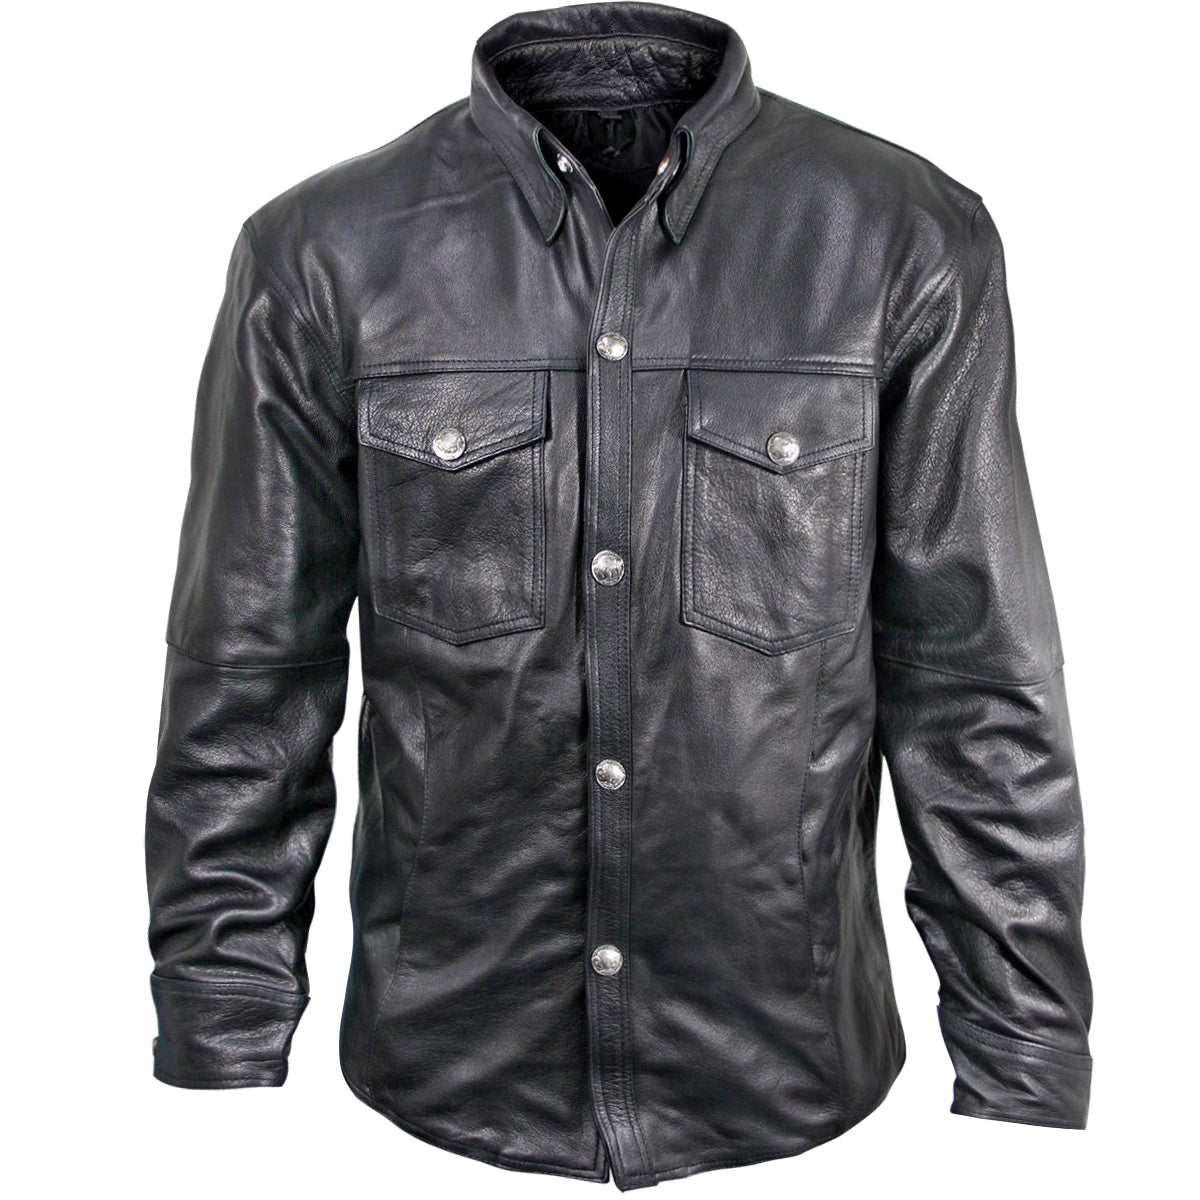 Xelement XS908B Black Leather Shirt for Men with Vintage Buffalo ...